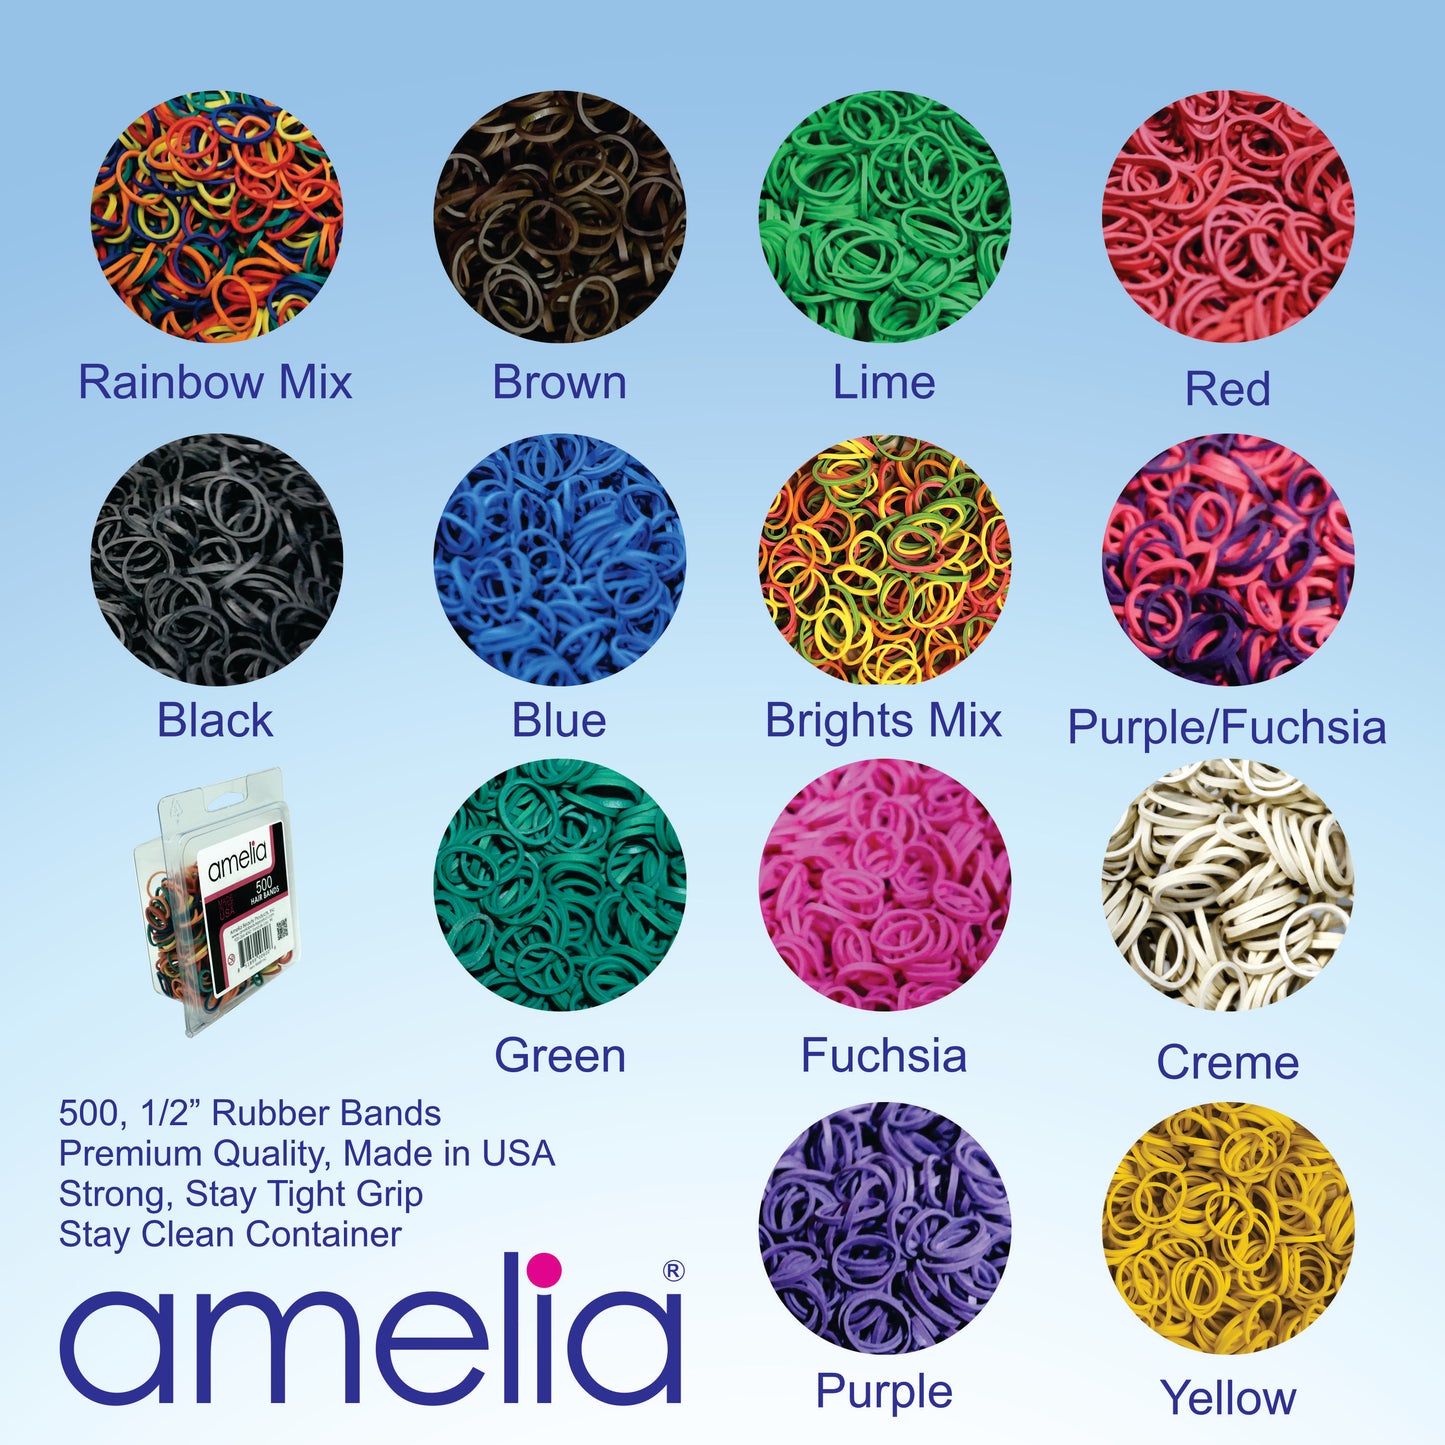 Amelia Beauty | 1/2in, Purple and Fuchsia Mix, Elastic Rubber Band Pony Tail Holders | Made in USA, Ideal for Ponytails, Braids, Twists, Dreadlocks, Styling Accessories for Women, Men and Girls | 500 Pack